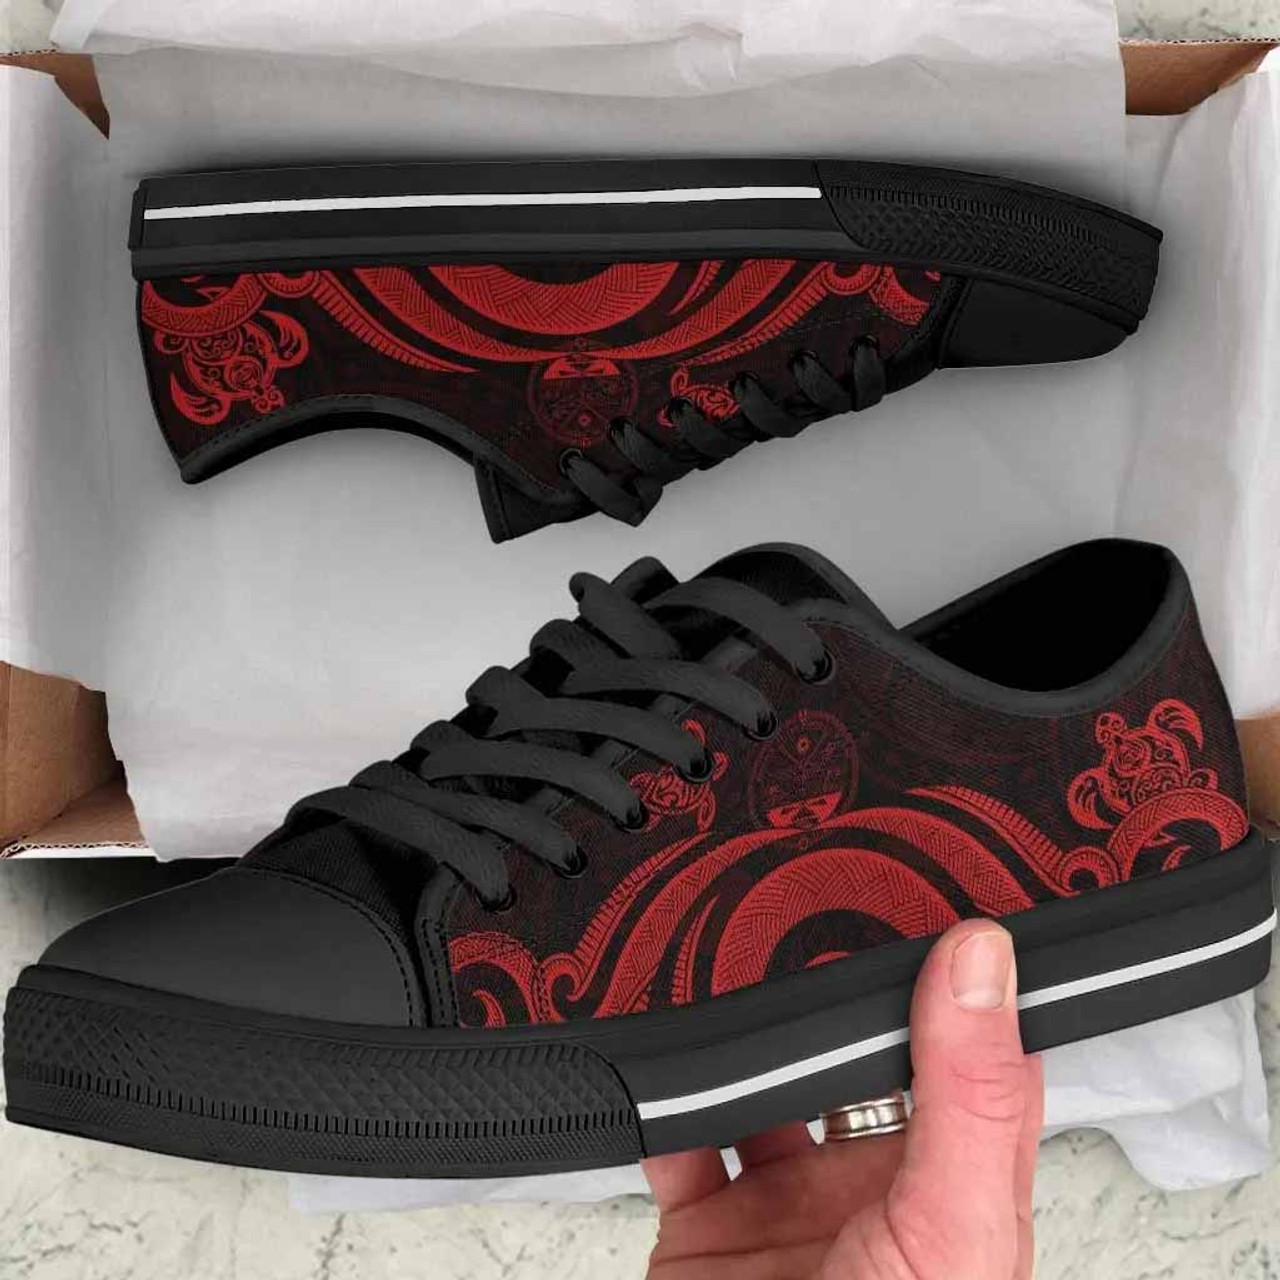 Marshall Islands Low Top Canvas Shoes - Red Tentacle Turtle Crest 4